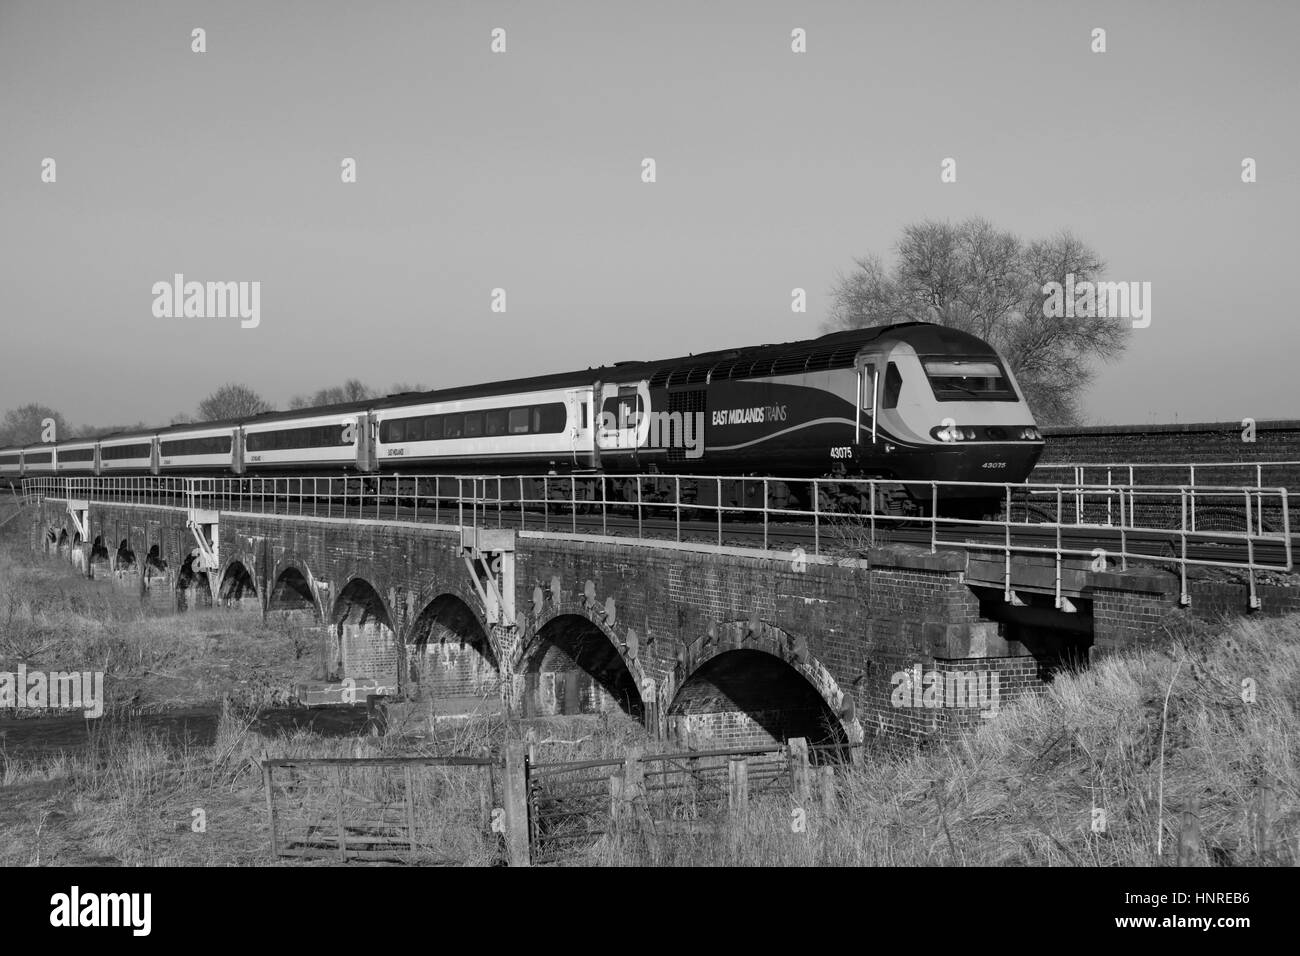 43075 East Midlands treni, Fiume Great Ouse, radwell village, bedfordshire, Inghilterra Foto Stock